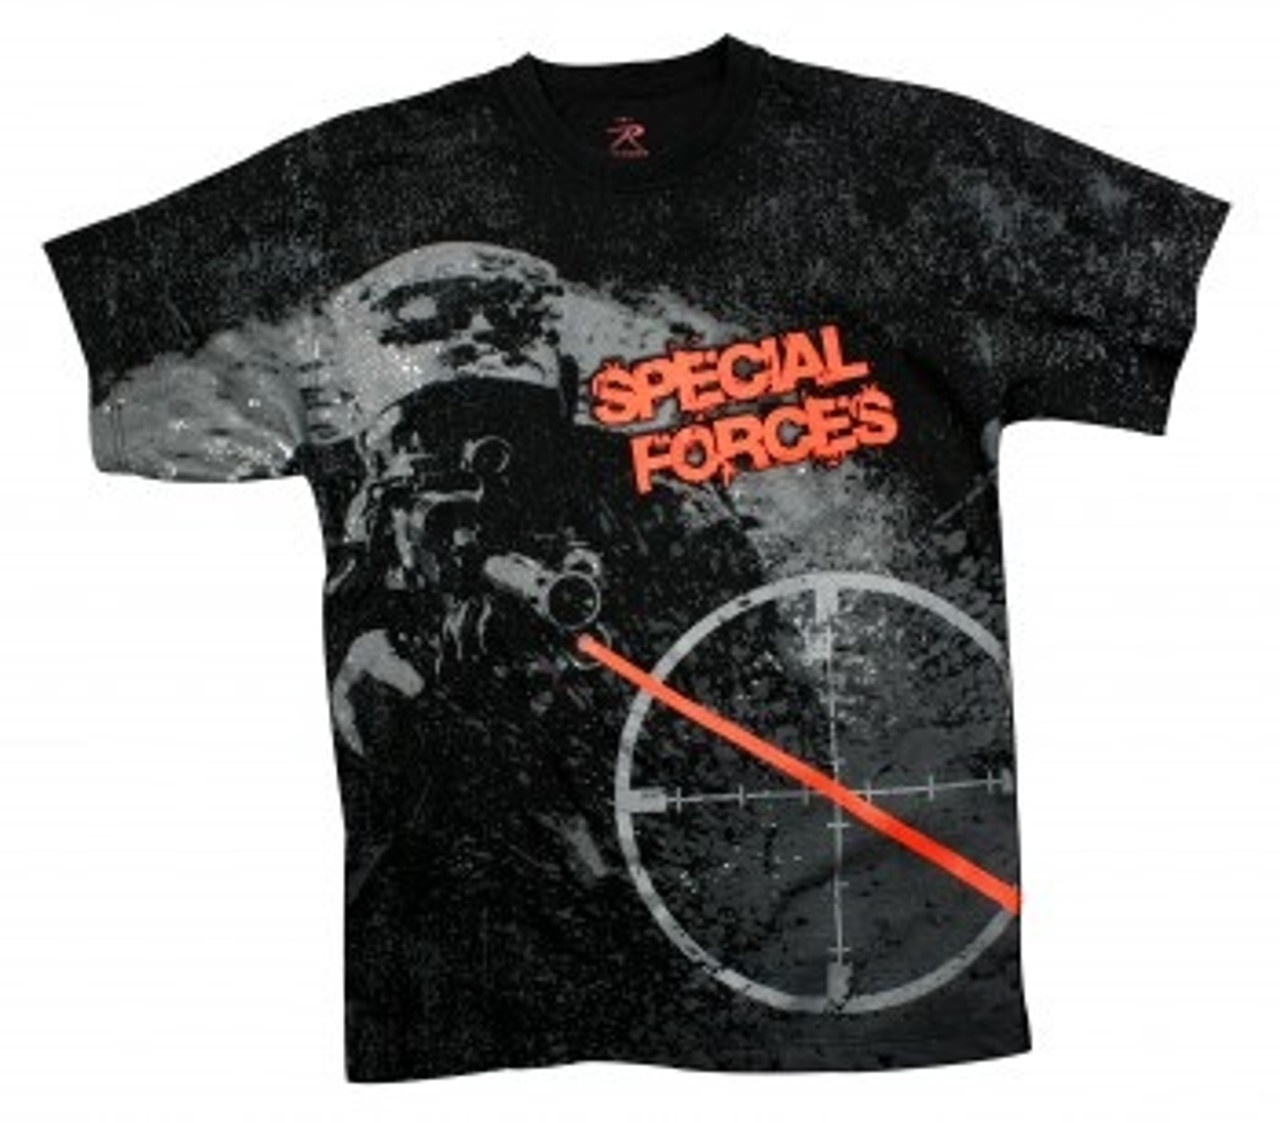 Rothco Vintage 'Special Forces' T-shirt